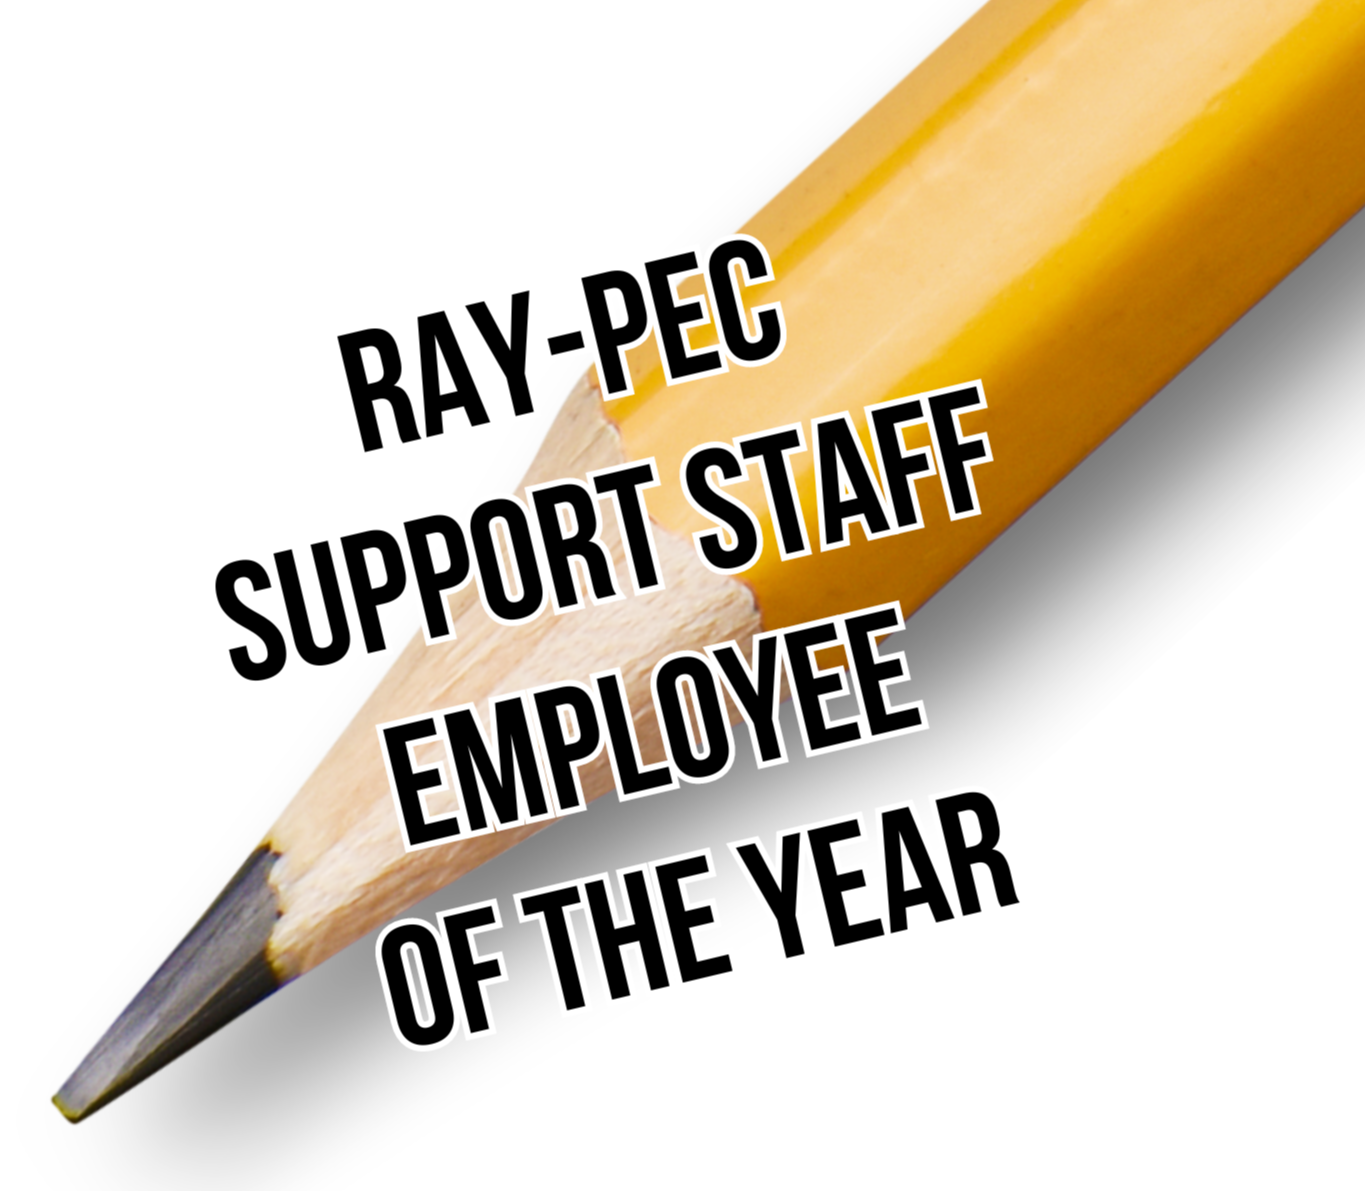 Pencil with the text "Ray-Pec Support Staff Employee of the Year"